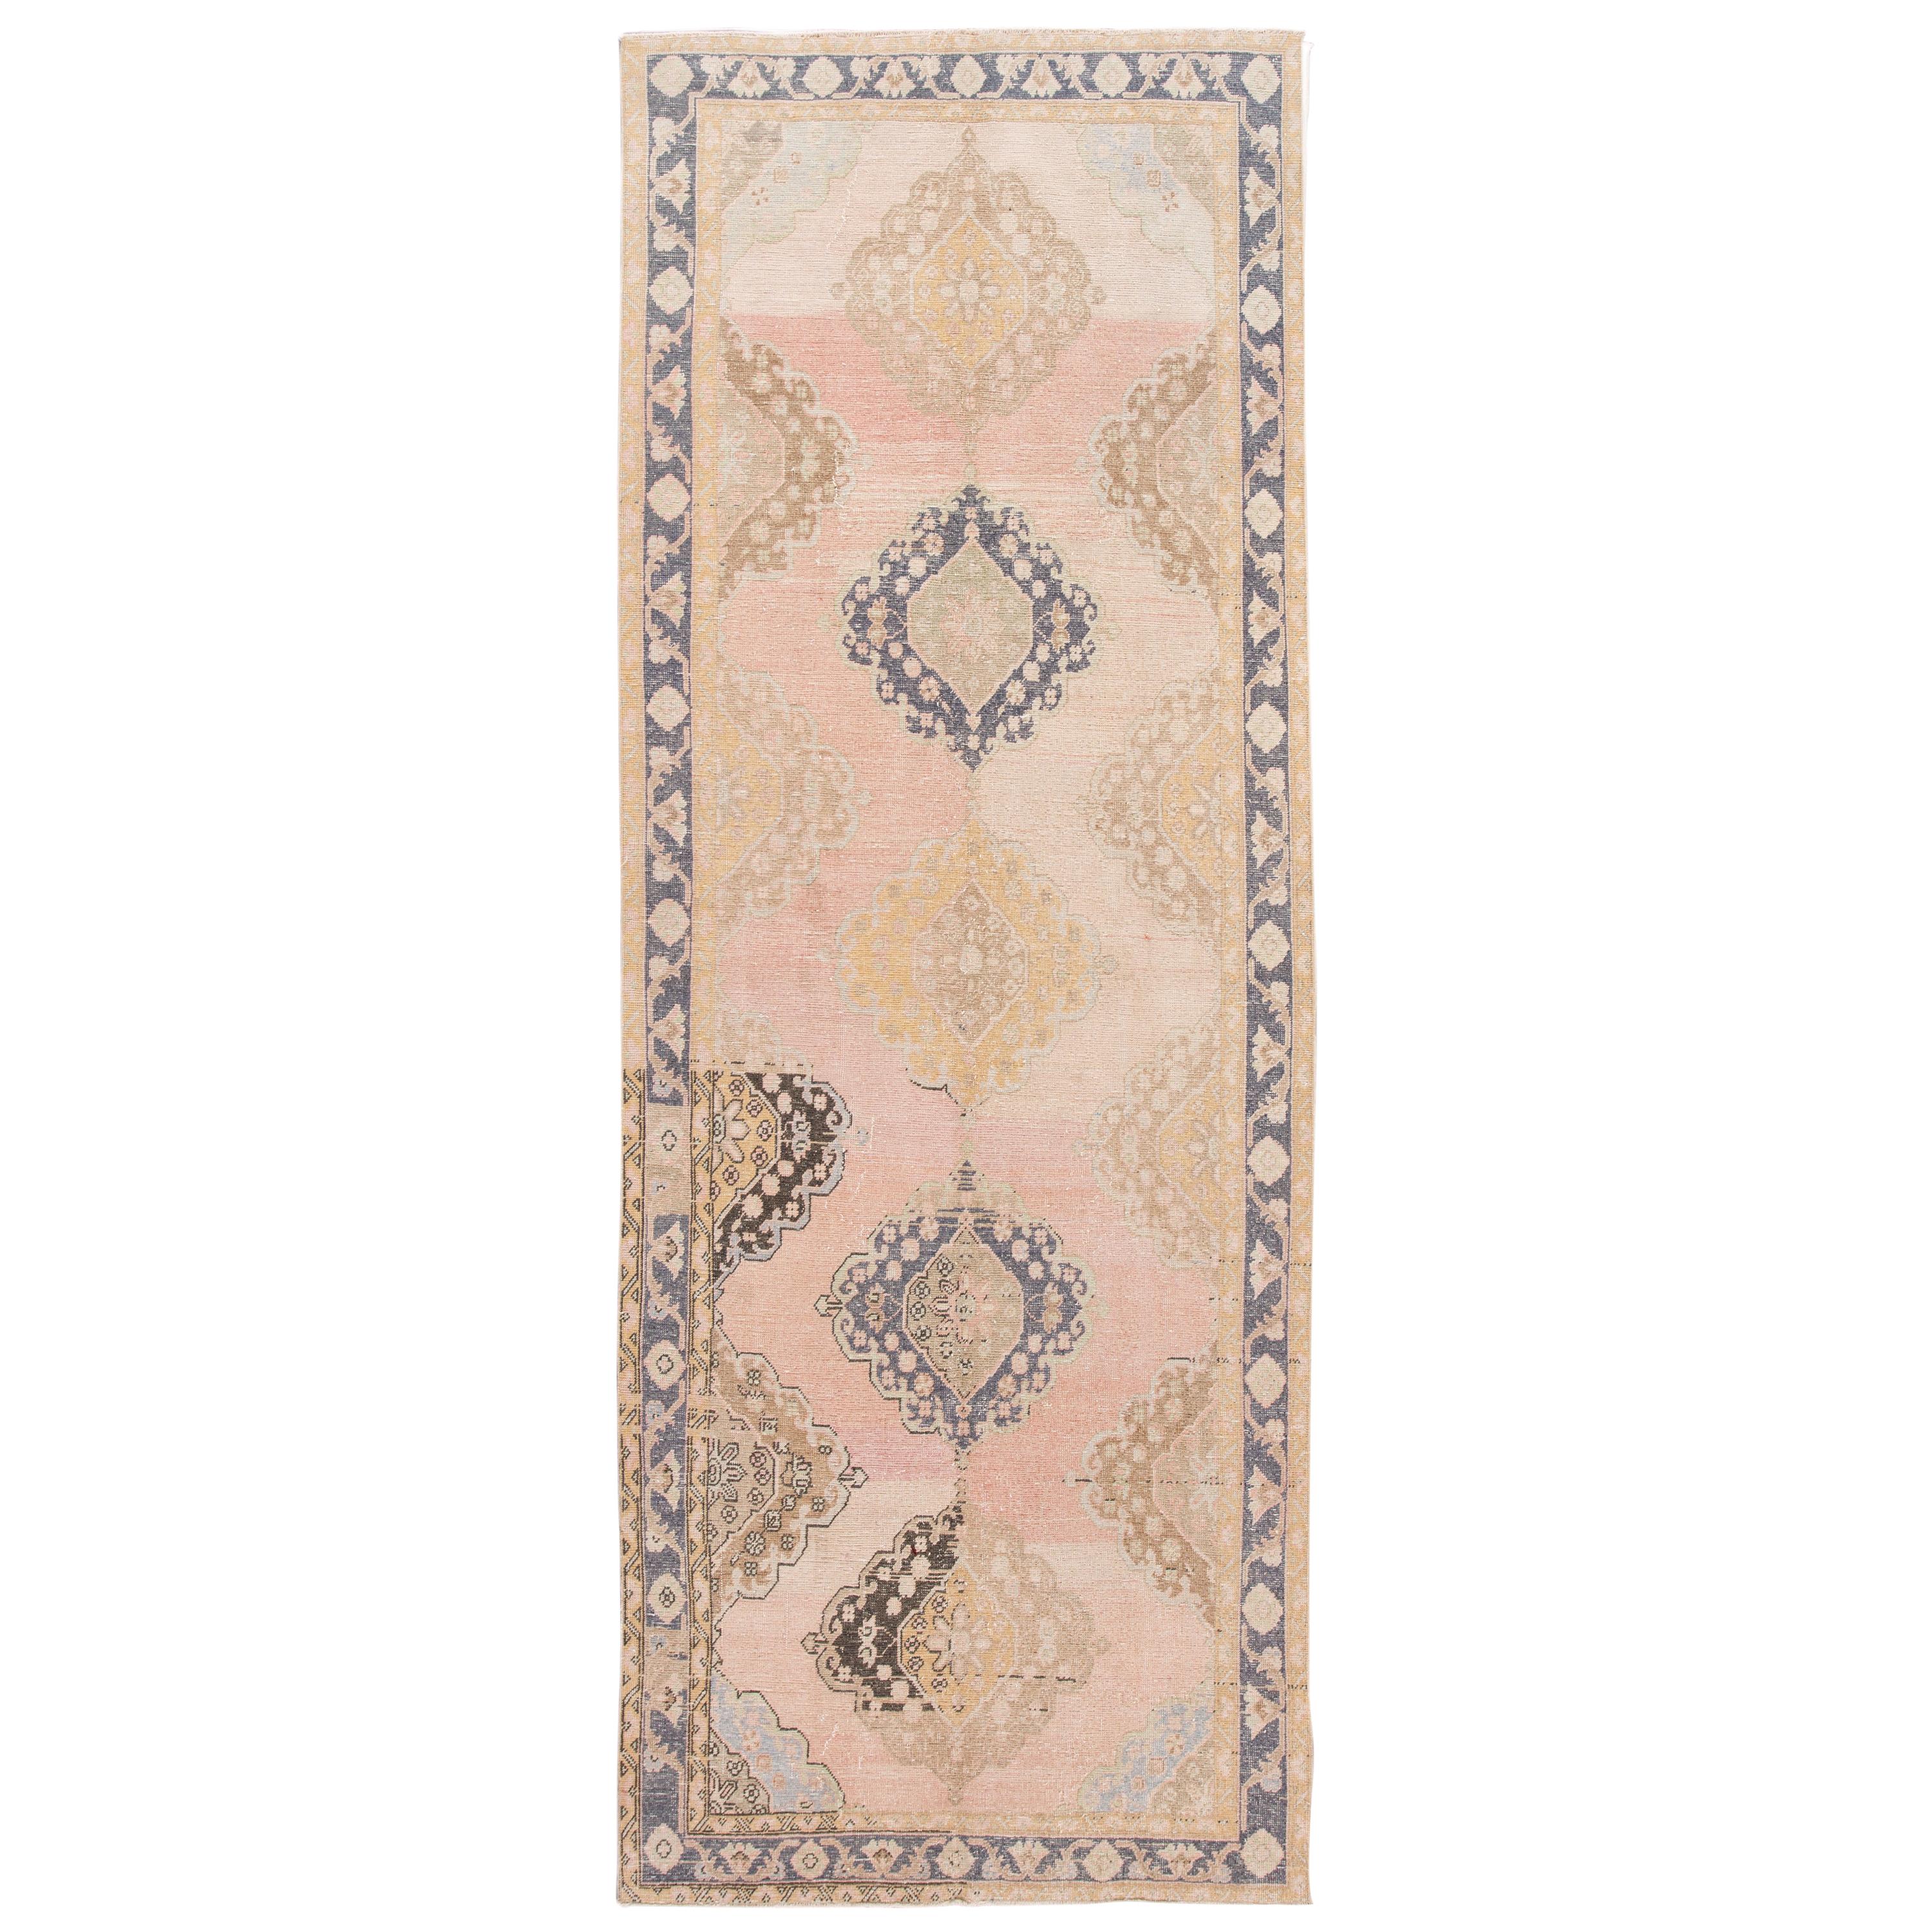 Early 20th Century Antique Turkish Wool Runner